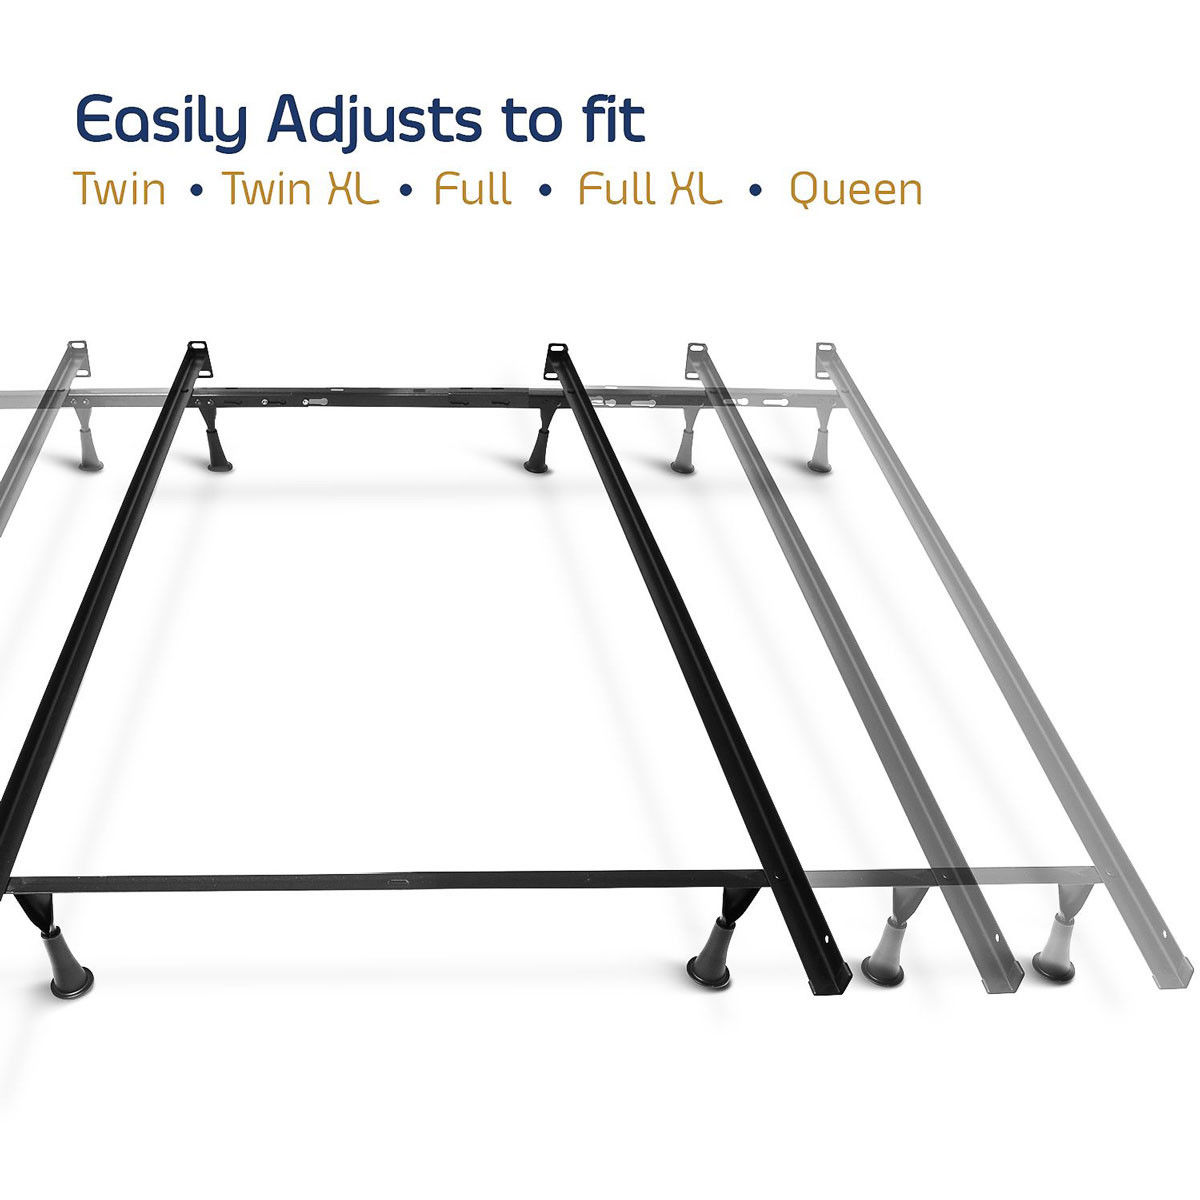 Is a bedframe piece included or do I need tools for setup?